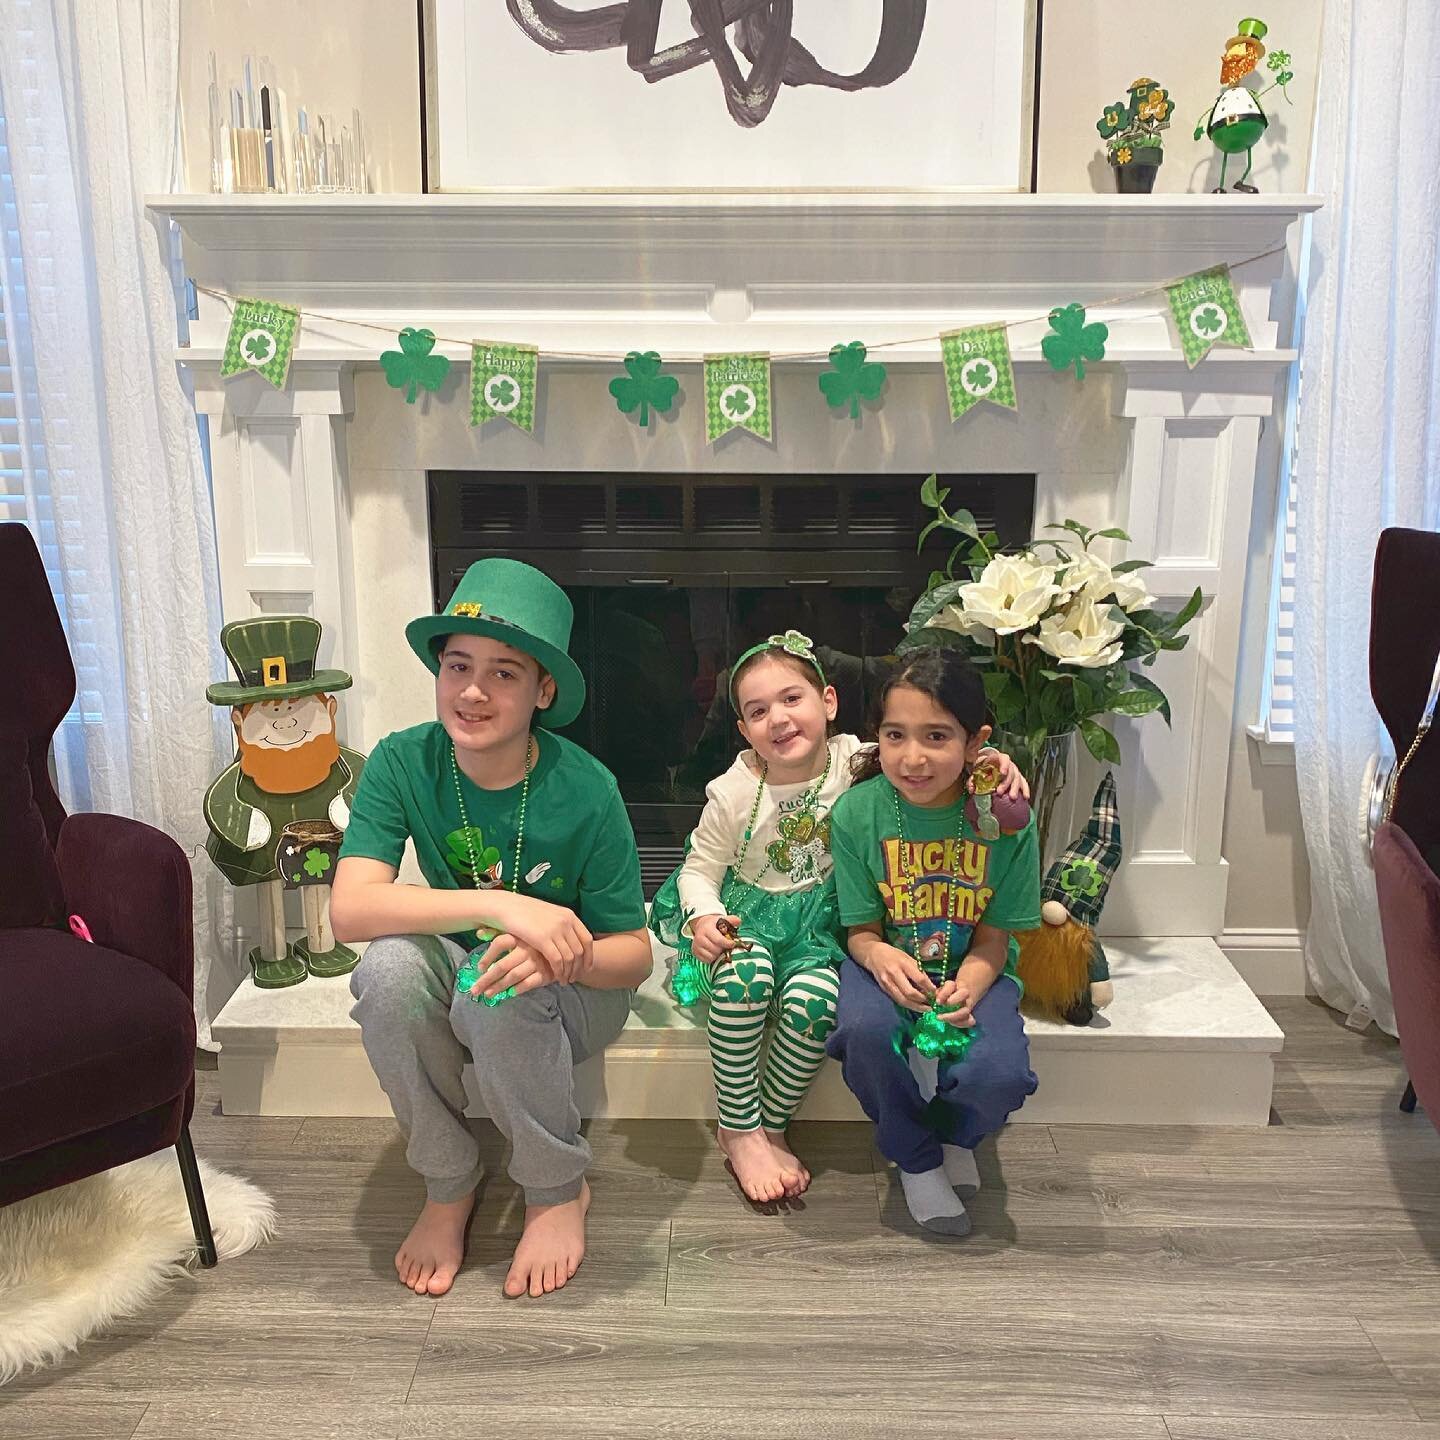 Happy St. Patrick&rsquo;s day from these festive lucky leprechauns 🍀 ☘️🍀